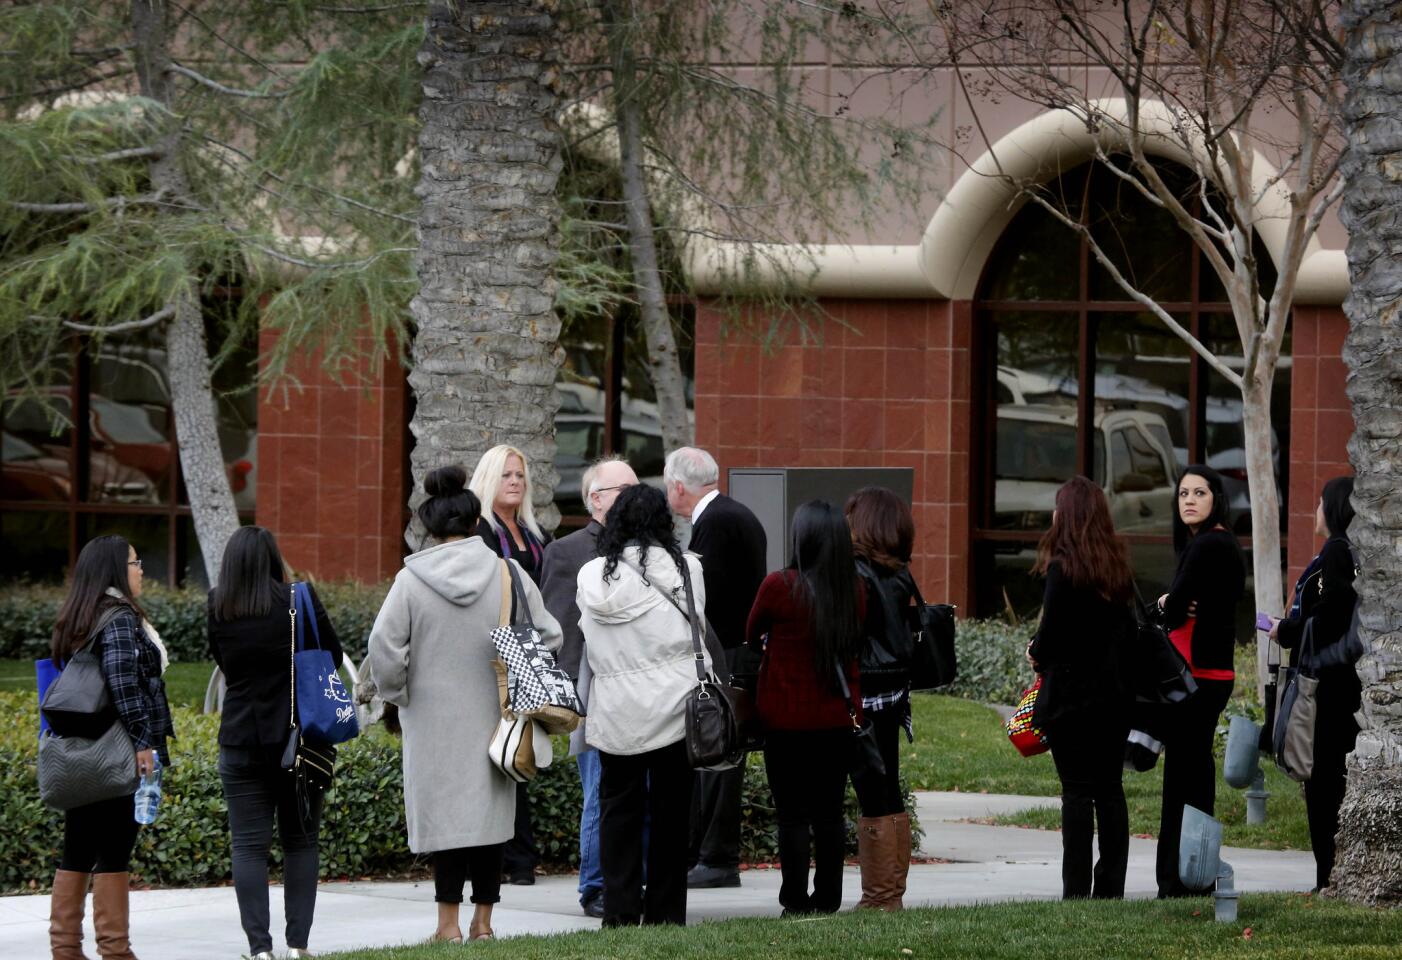 Employees wait to enter the Inland Regional Center complex in San Bernardino as it reopens for the first time since a mass shooting there last month that left 14 people dead.